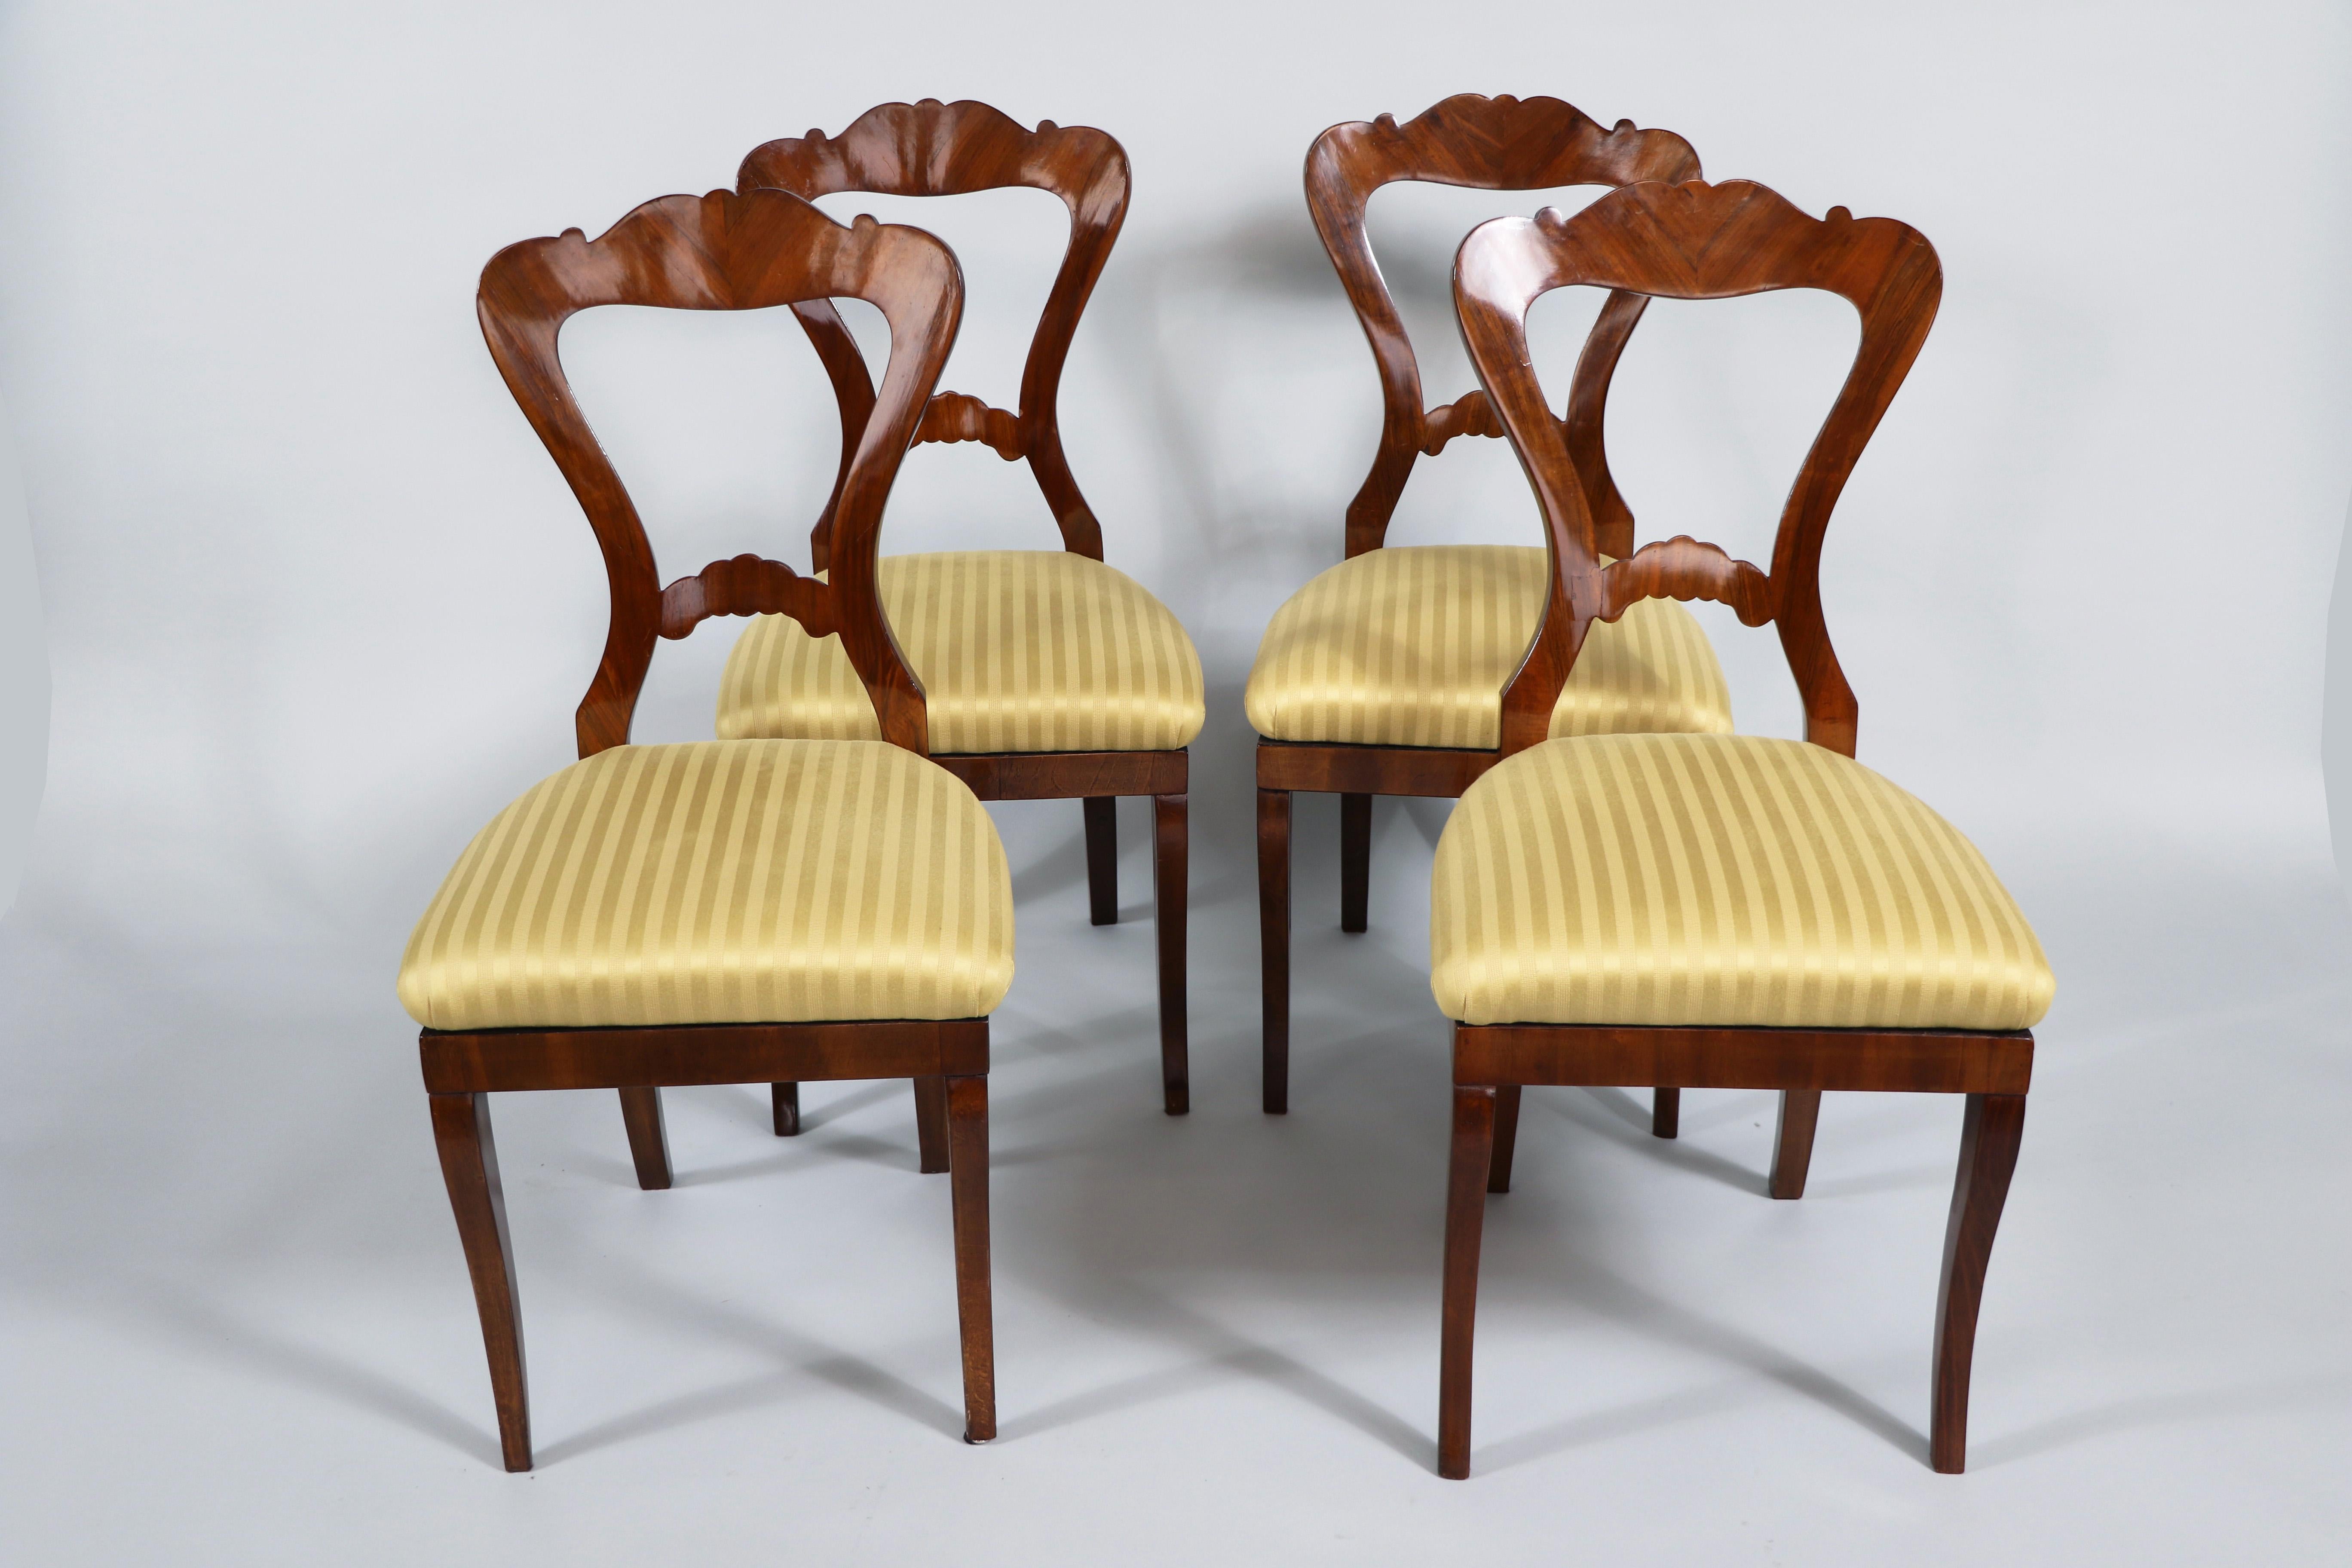 Hello,
These Fine set of four Viennese Biedermeier walnut chairs from circa 1825 is the best example of an early Viennese Biedermeier which reflect innovative design and highest quality craftsmanship.

Viennese Biedermeier pieces are distinguished